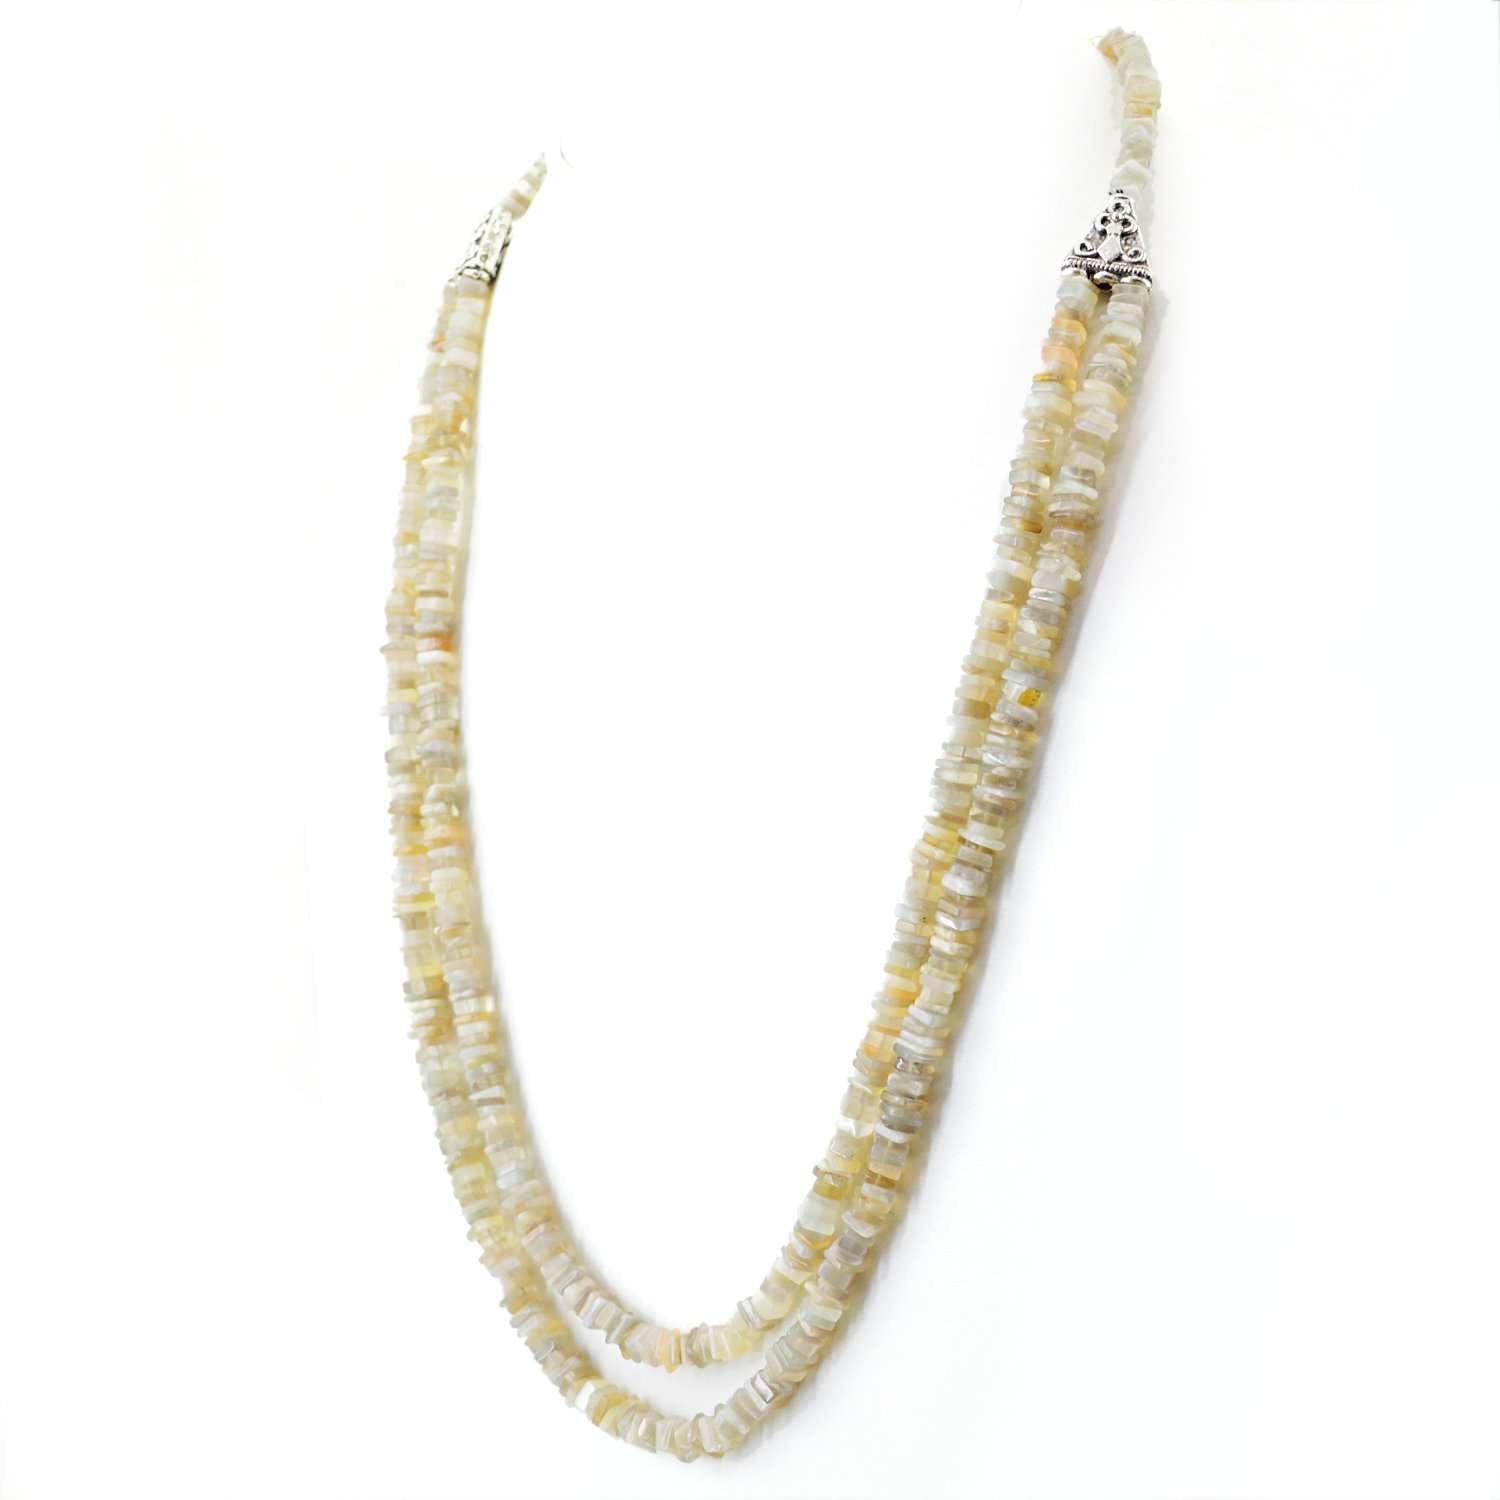 gemsmore:2 Strand Agate Necklace Natural Untreated Beads